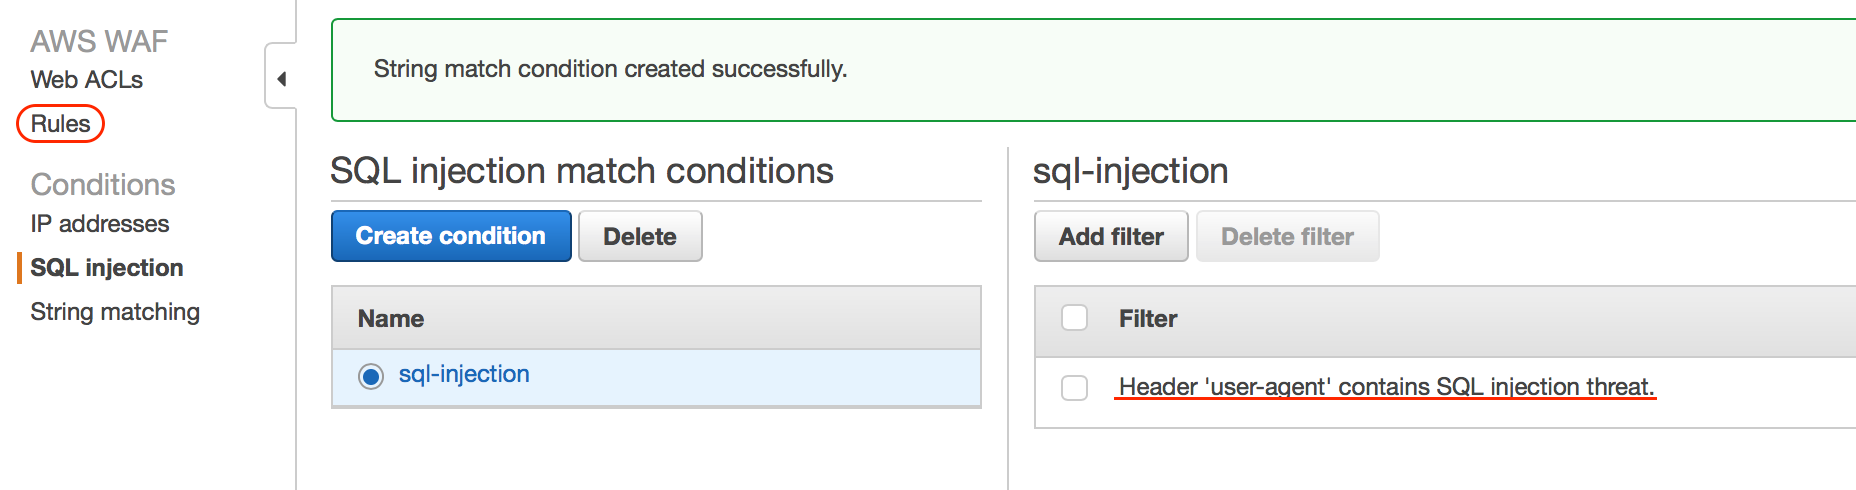 aws-waf_sql-injection_2015120405.png